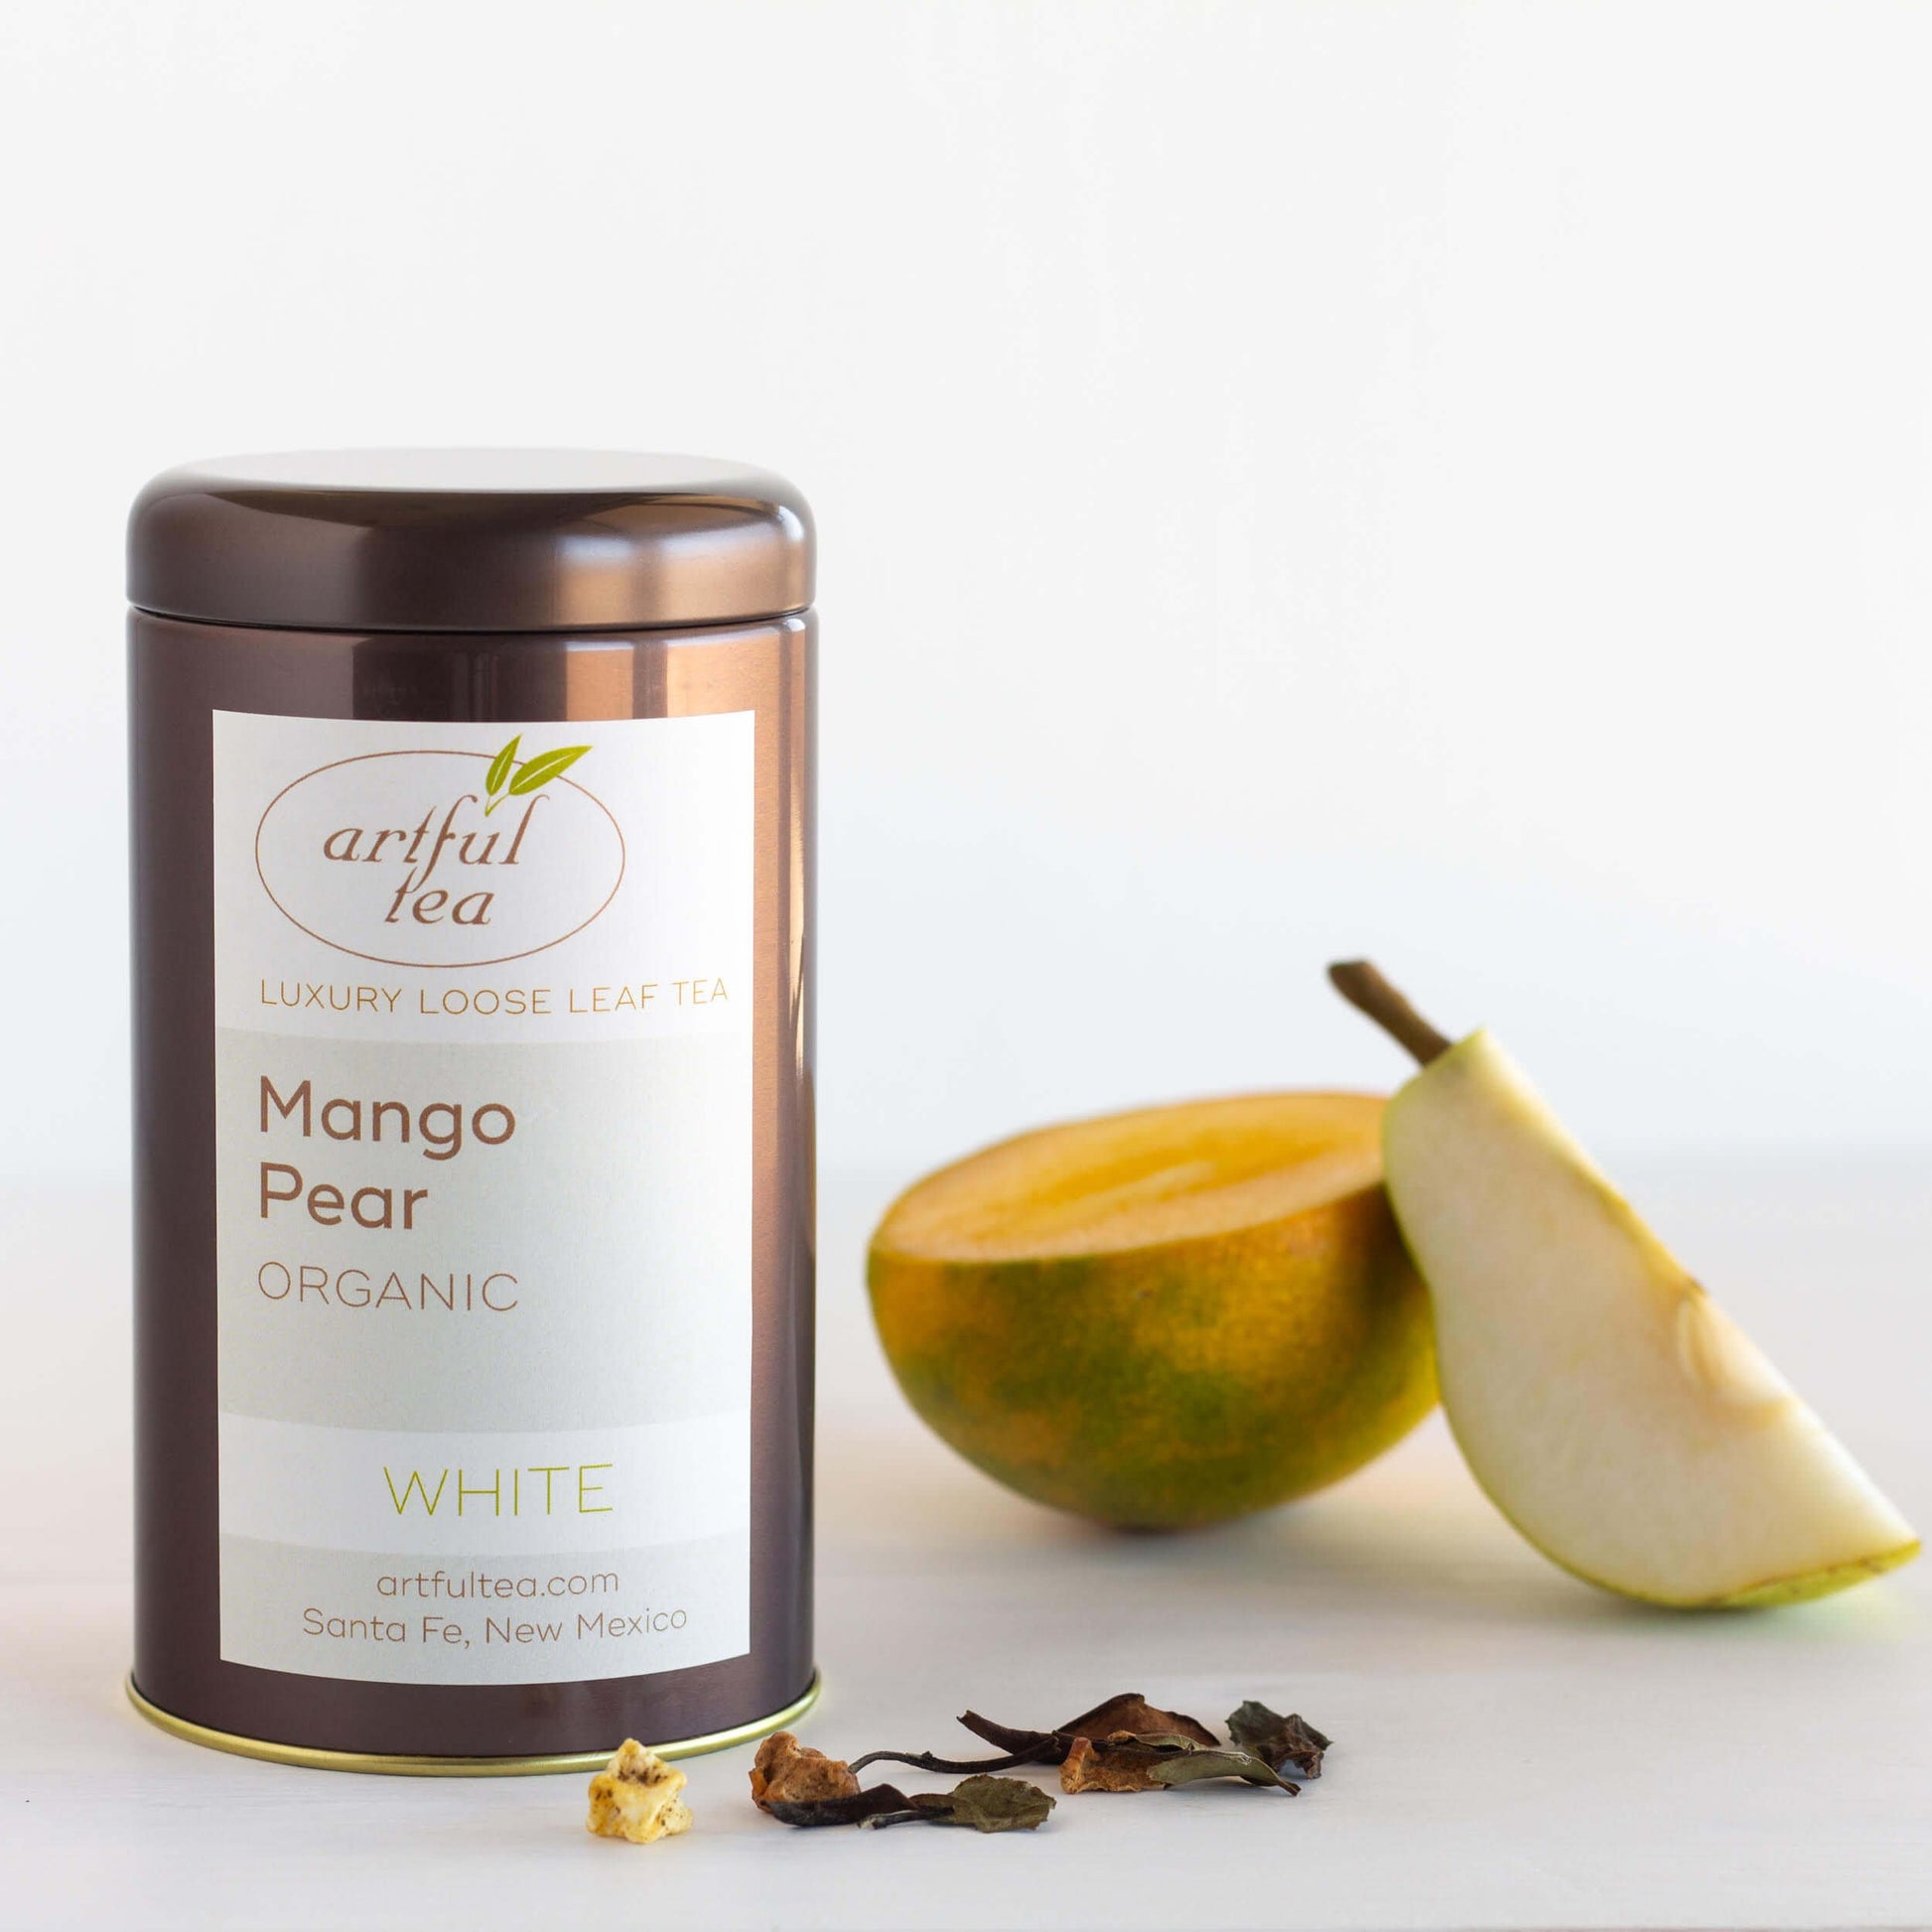 Mango Pear Organic White Tea shown packaged in a brown tin, with a sliced mango and a wedge of fresh pear nearby